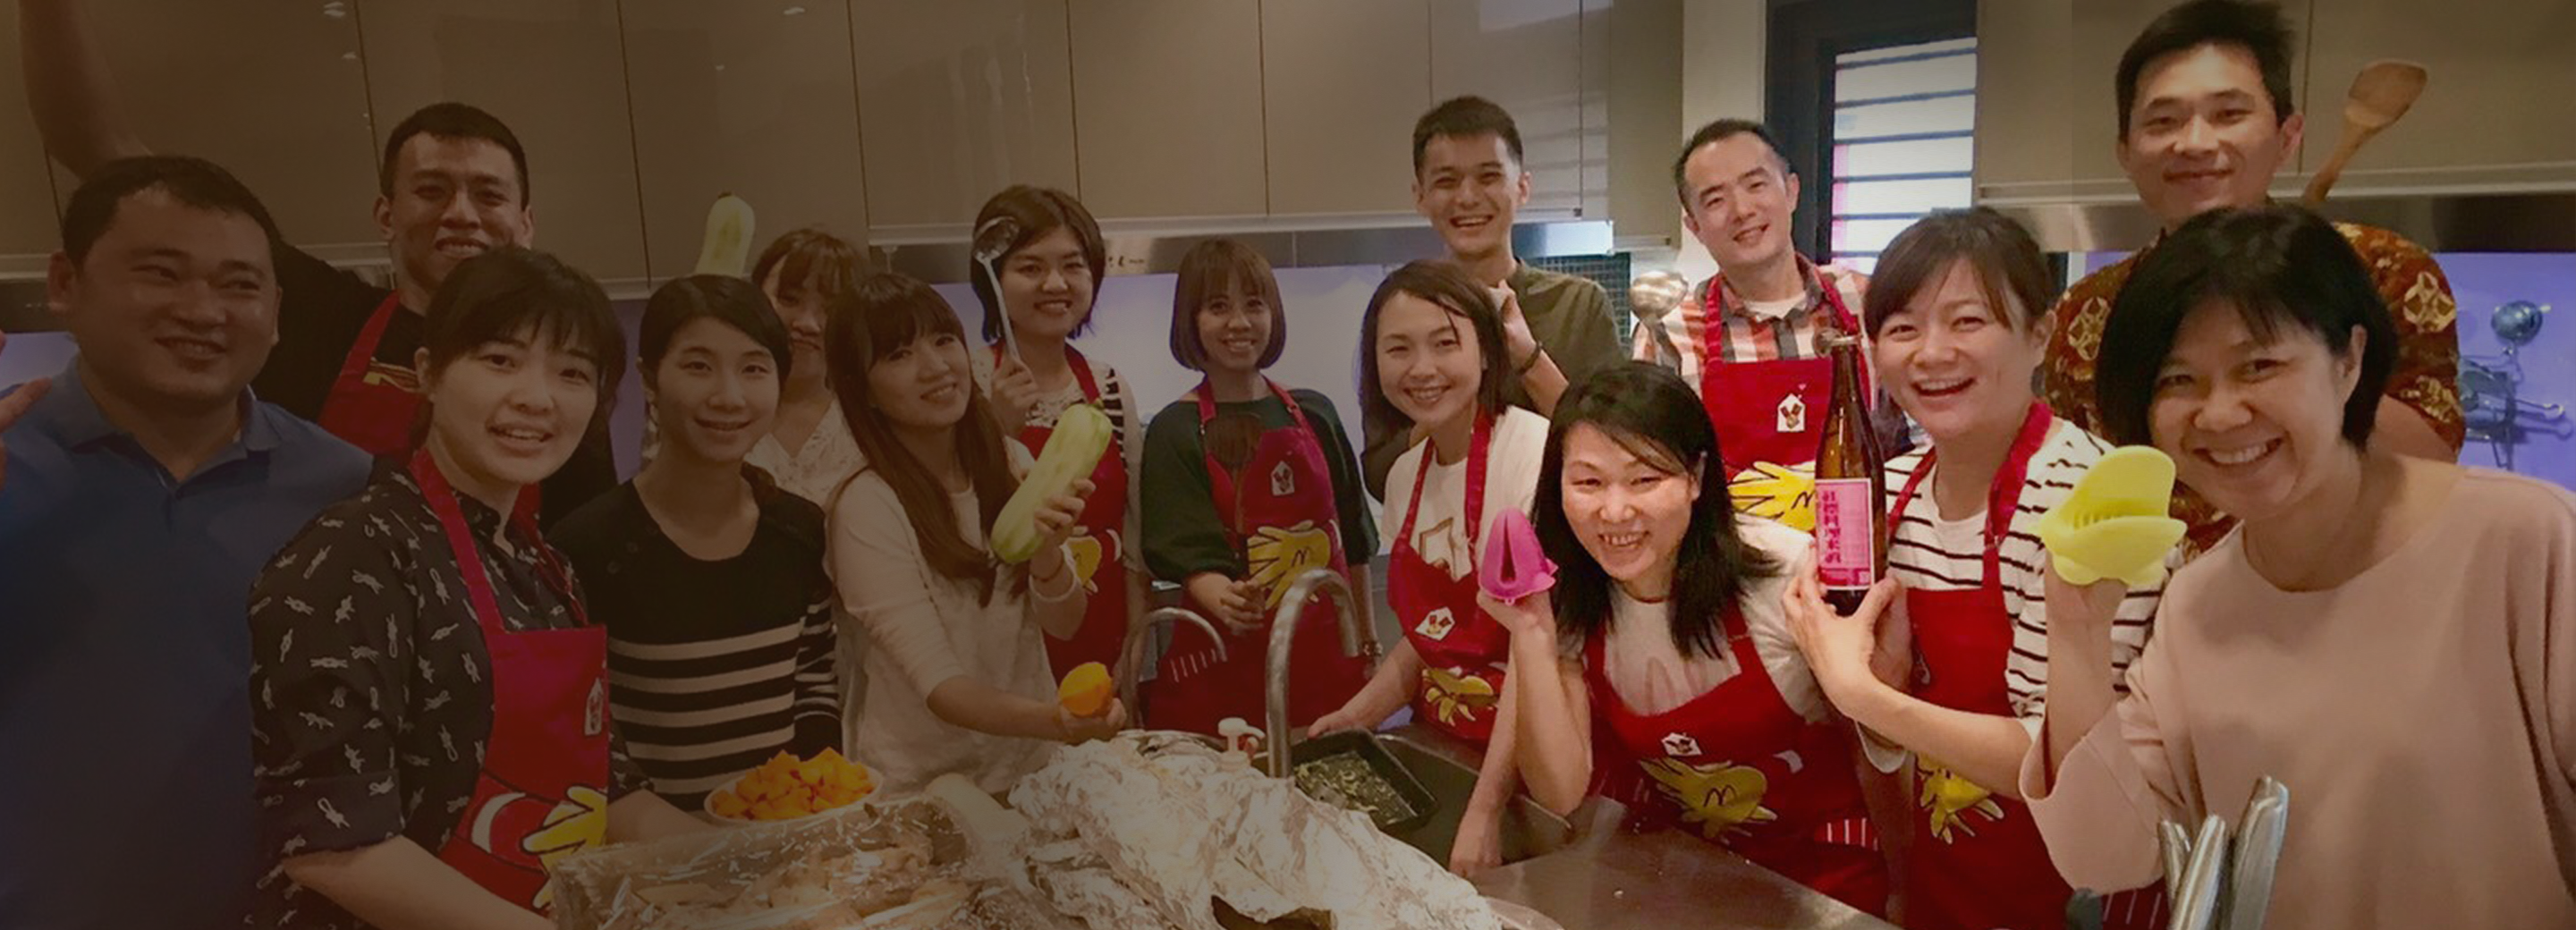 Volunteers posing around food prepared at and for their local Ronald McDonald House program